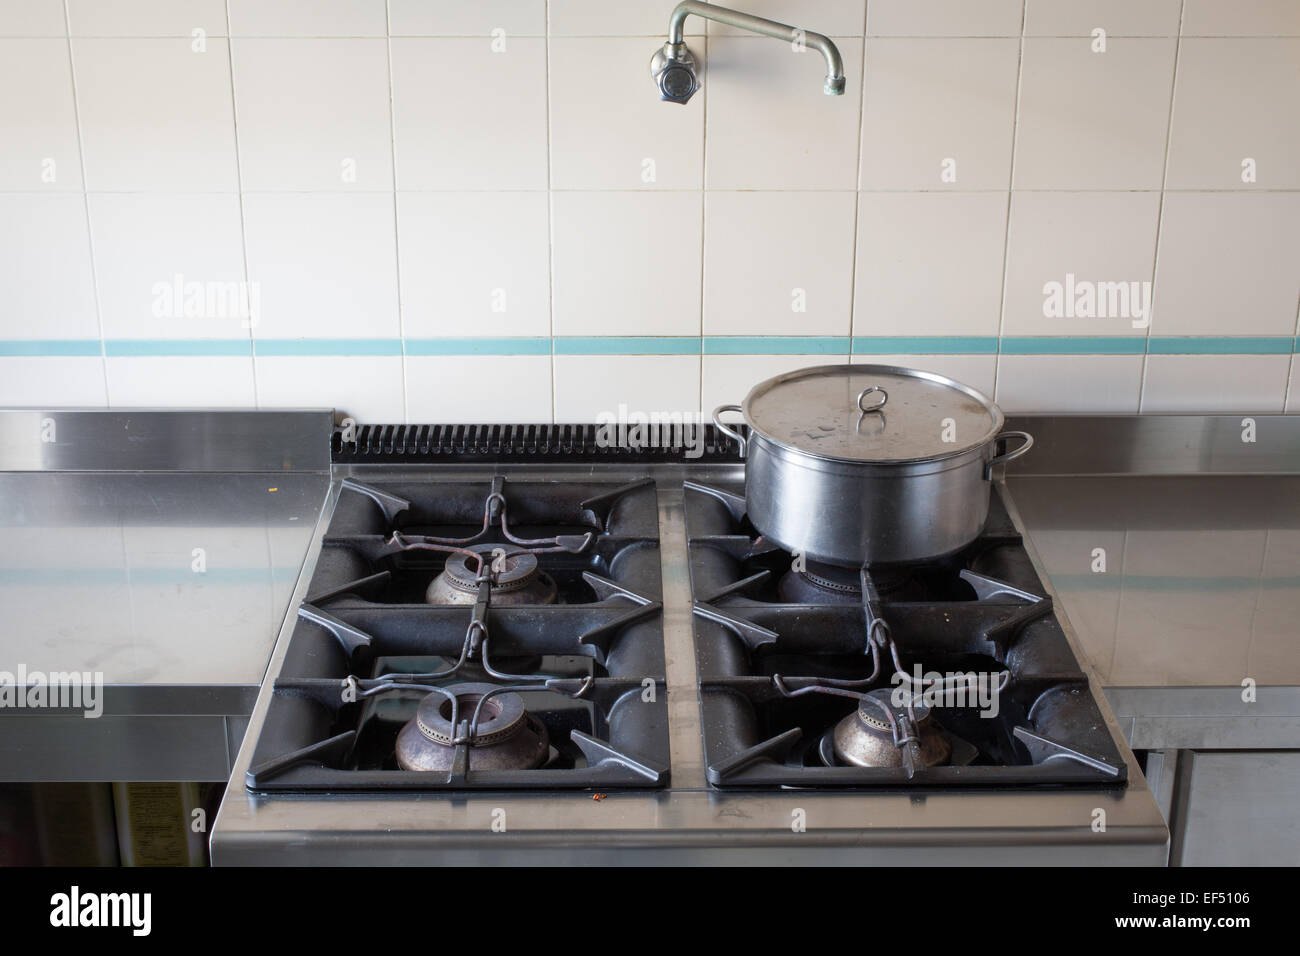 https://c8.alamy.com/comp/EF5106/steel-large-pot-over-the-stove-of-industrial-kitchen-in-stainless-EF5106.jpg